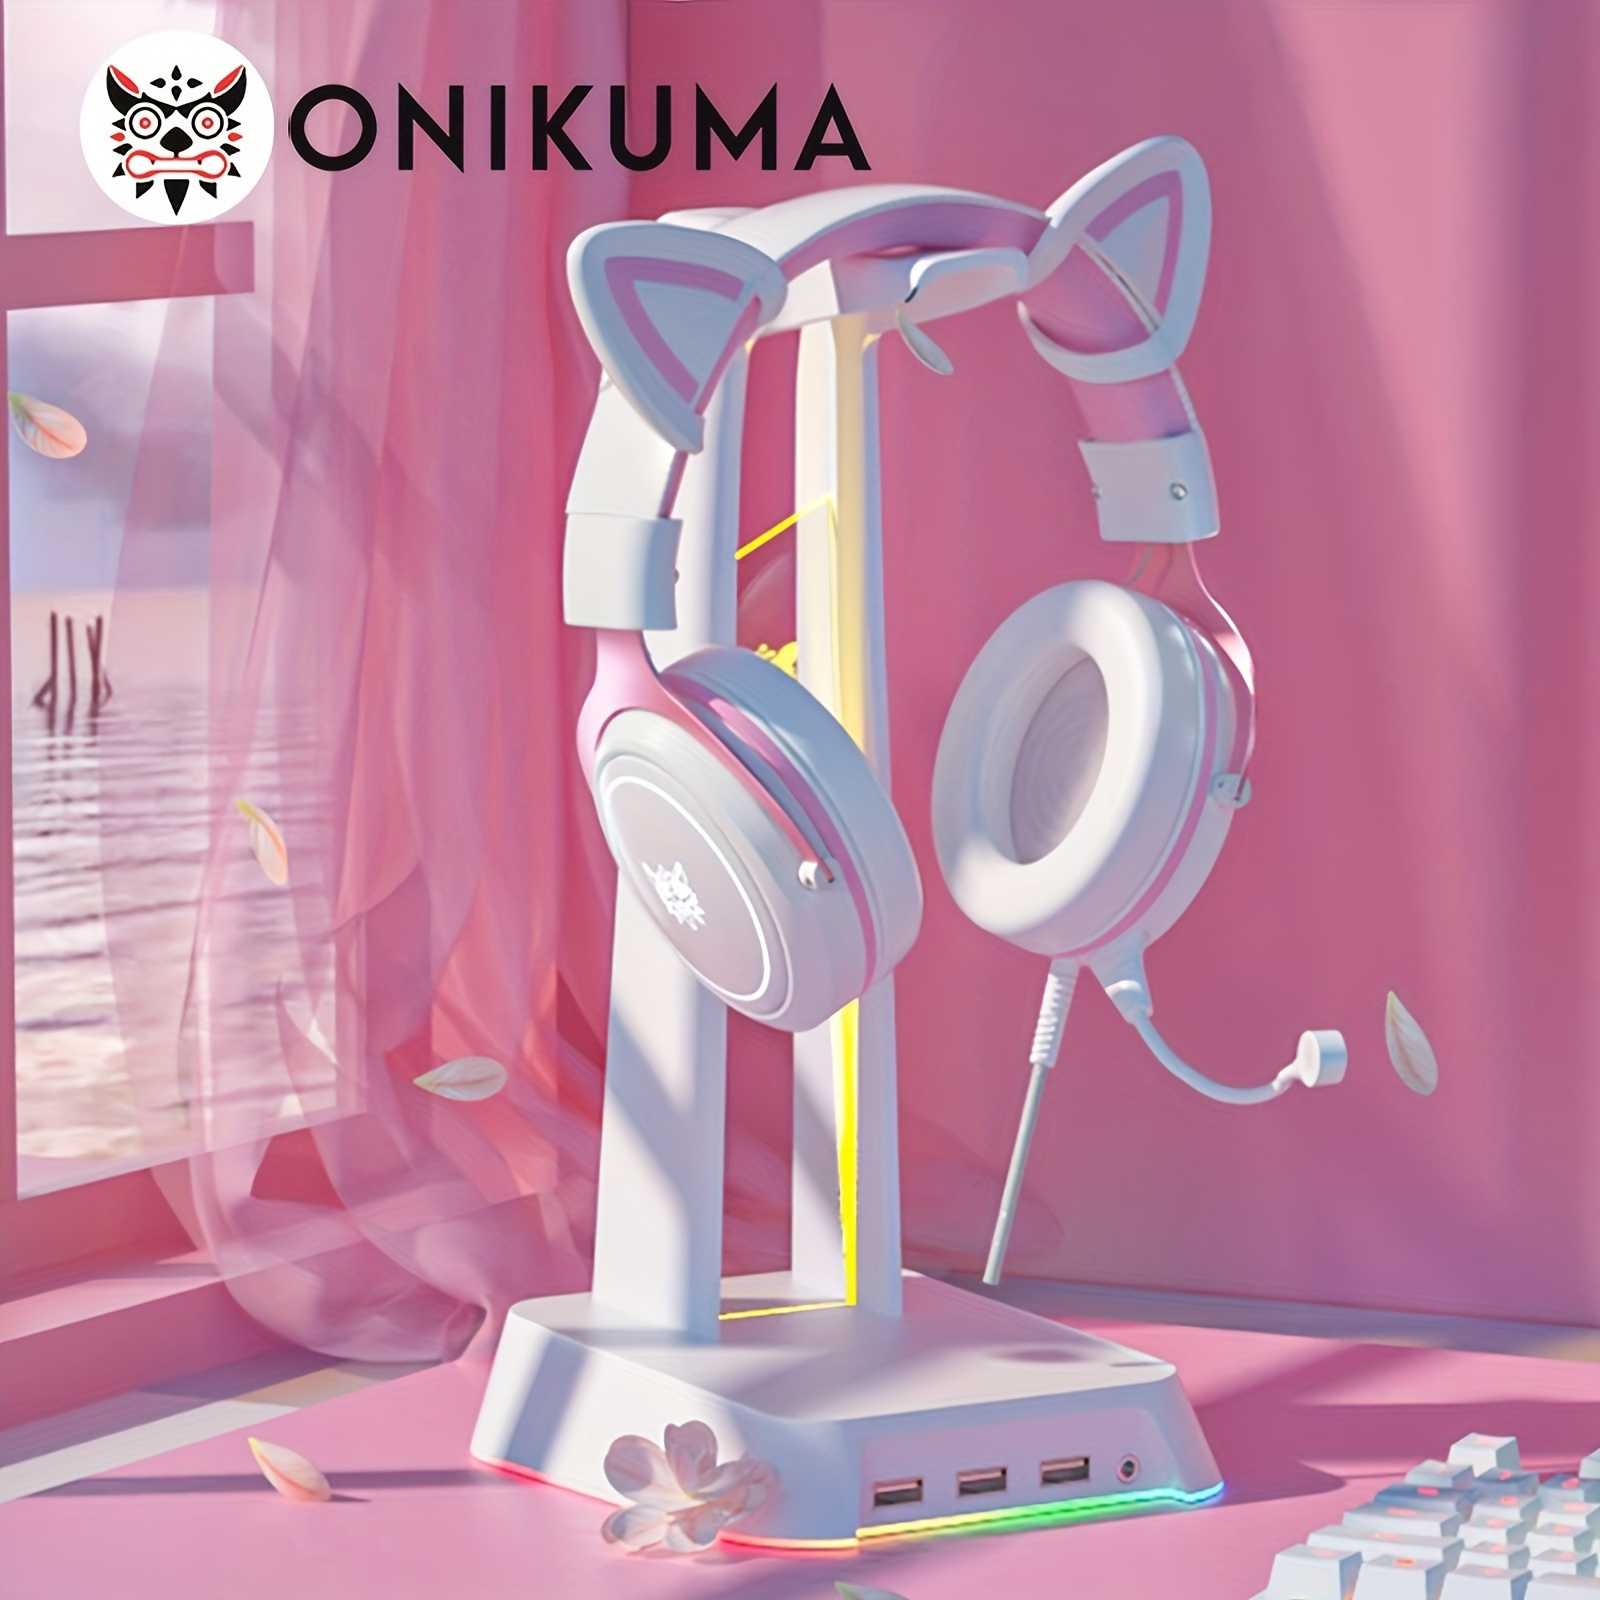 

Onikuma X10 Cat Ears Head-mounted Gaming Headset Computer Wired Luminous For E-sports Noise Cancelling Headset